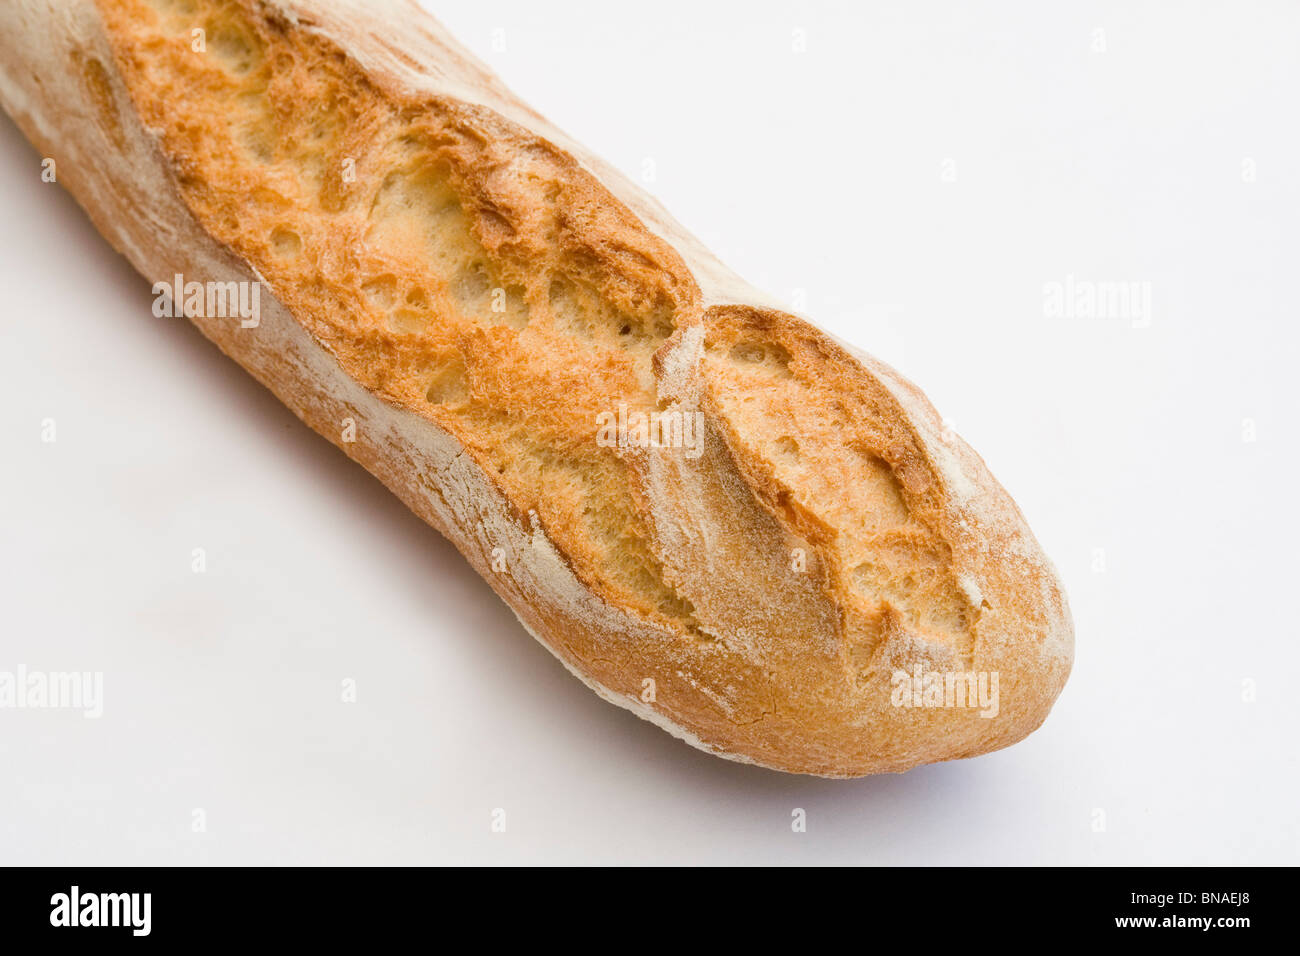 A half traditional French stick of bread on a white background (France). Demi-baguette de pain sur fond blanc (France). Stock Photo